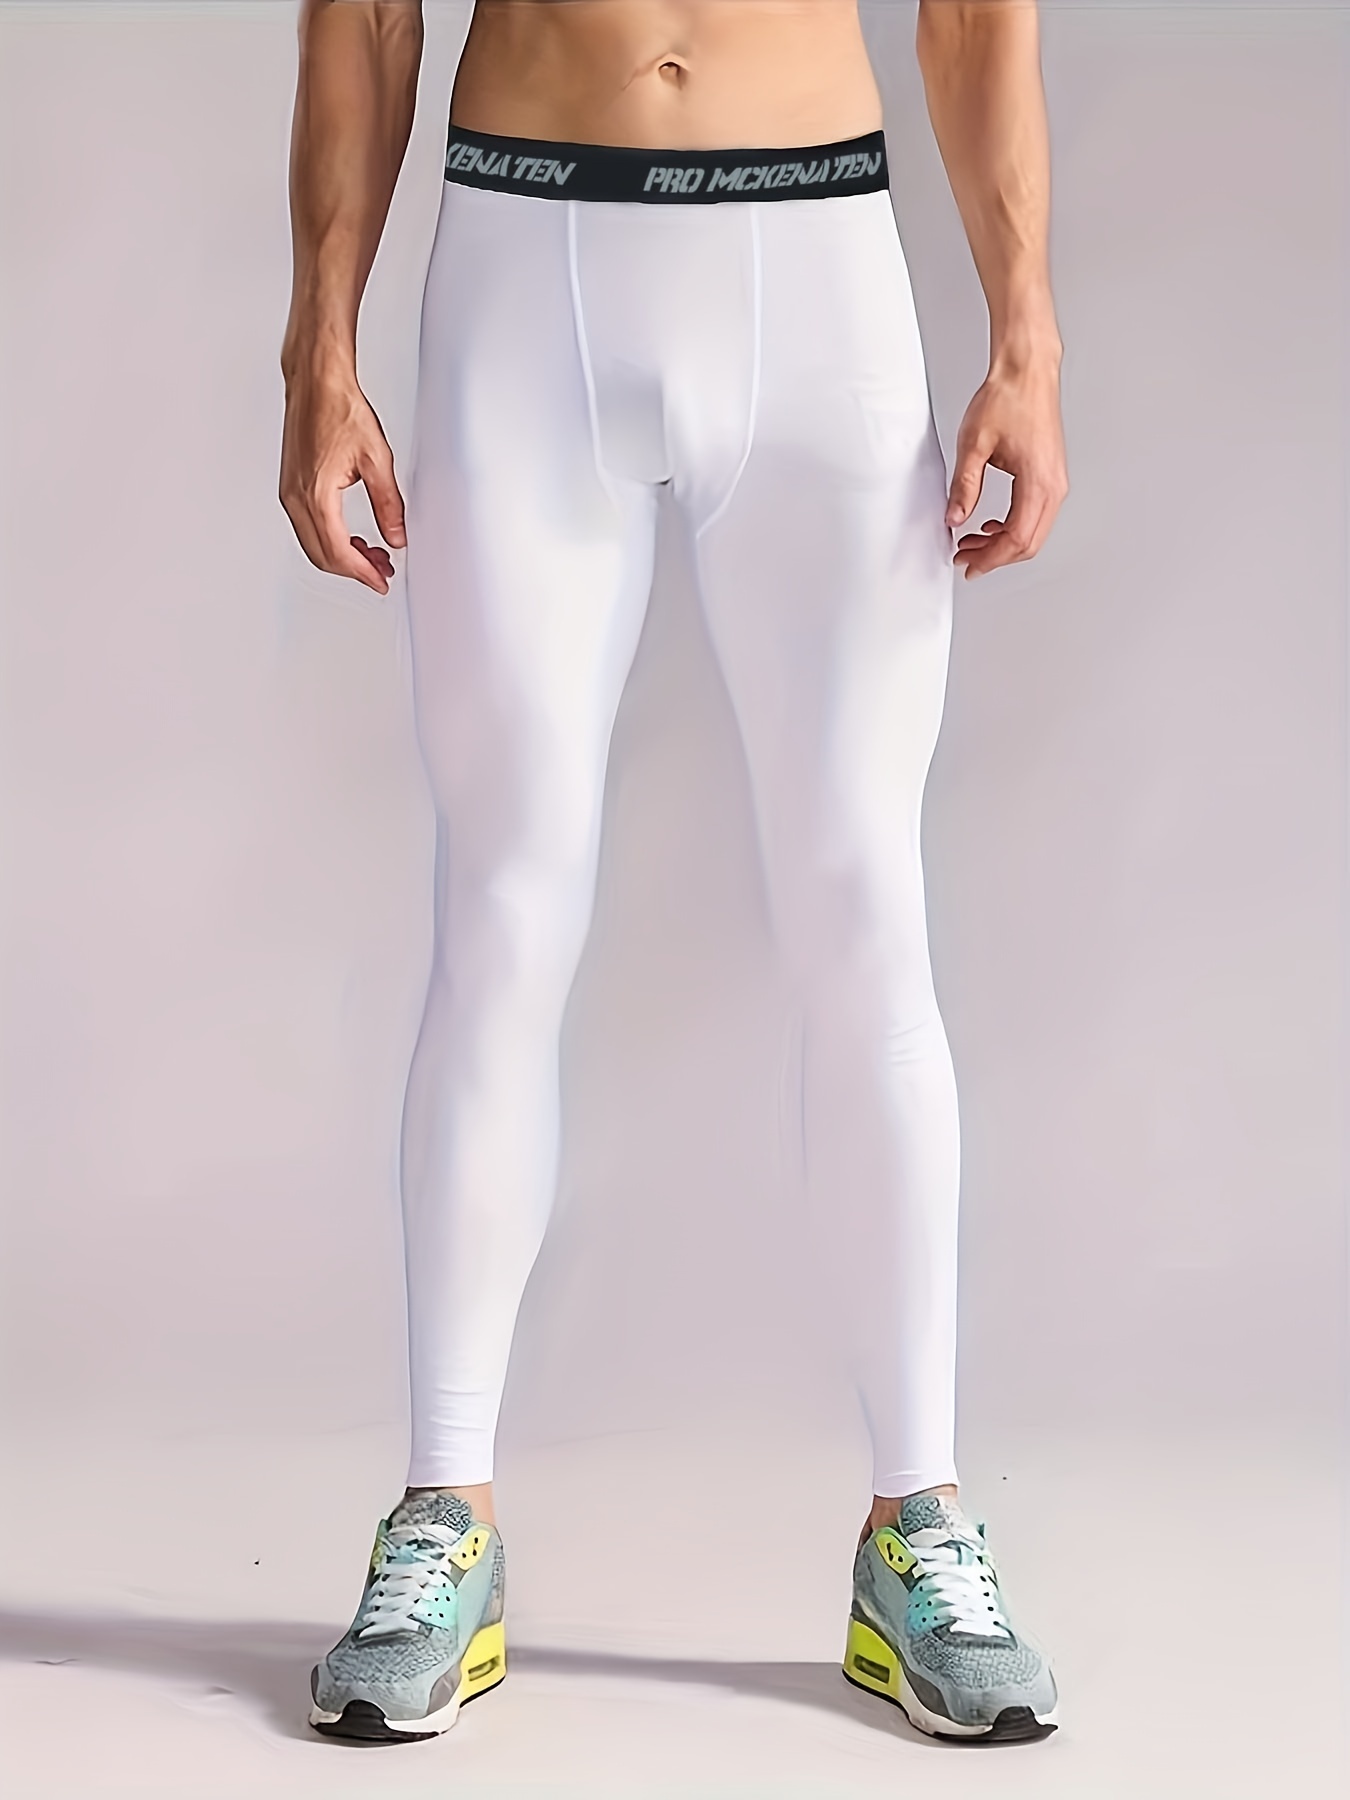 Compression Pants Men Basketball Cool Quick Dry Athletic Workout Running  Tights, Men's Sports Leggings For Gym Cycling